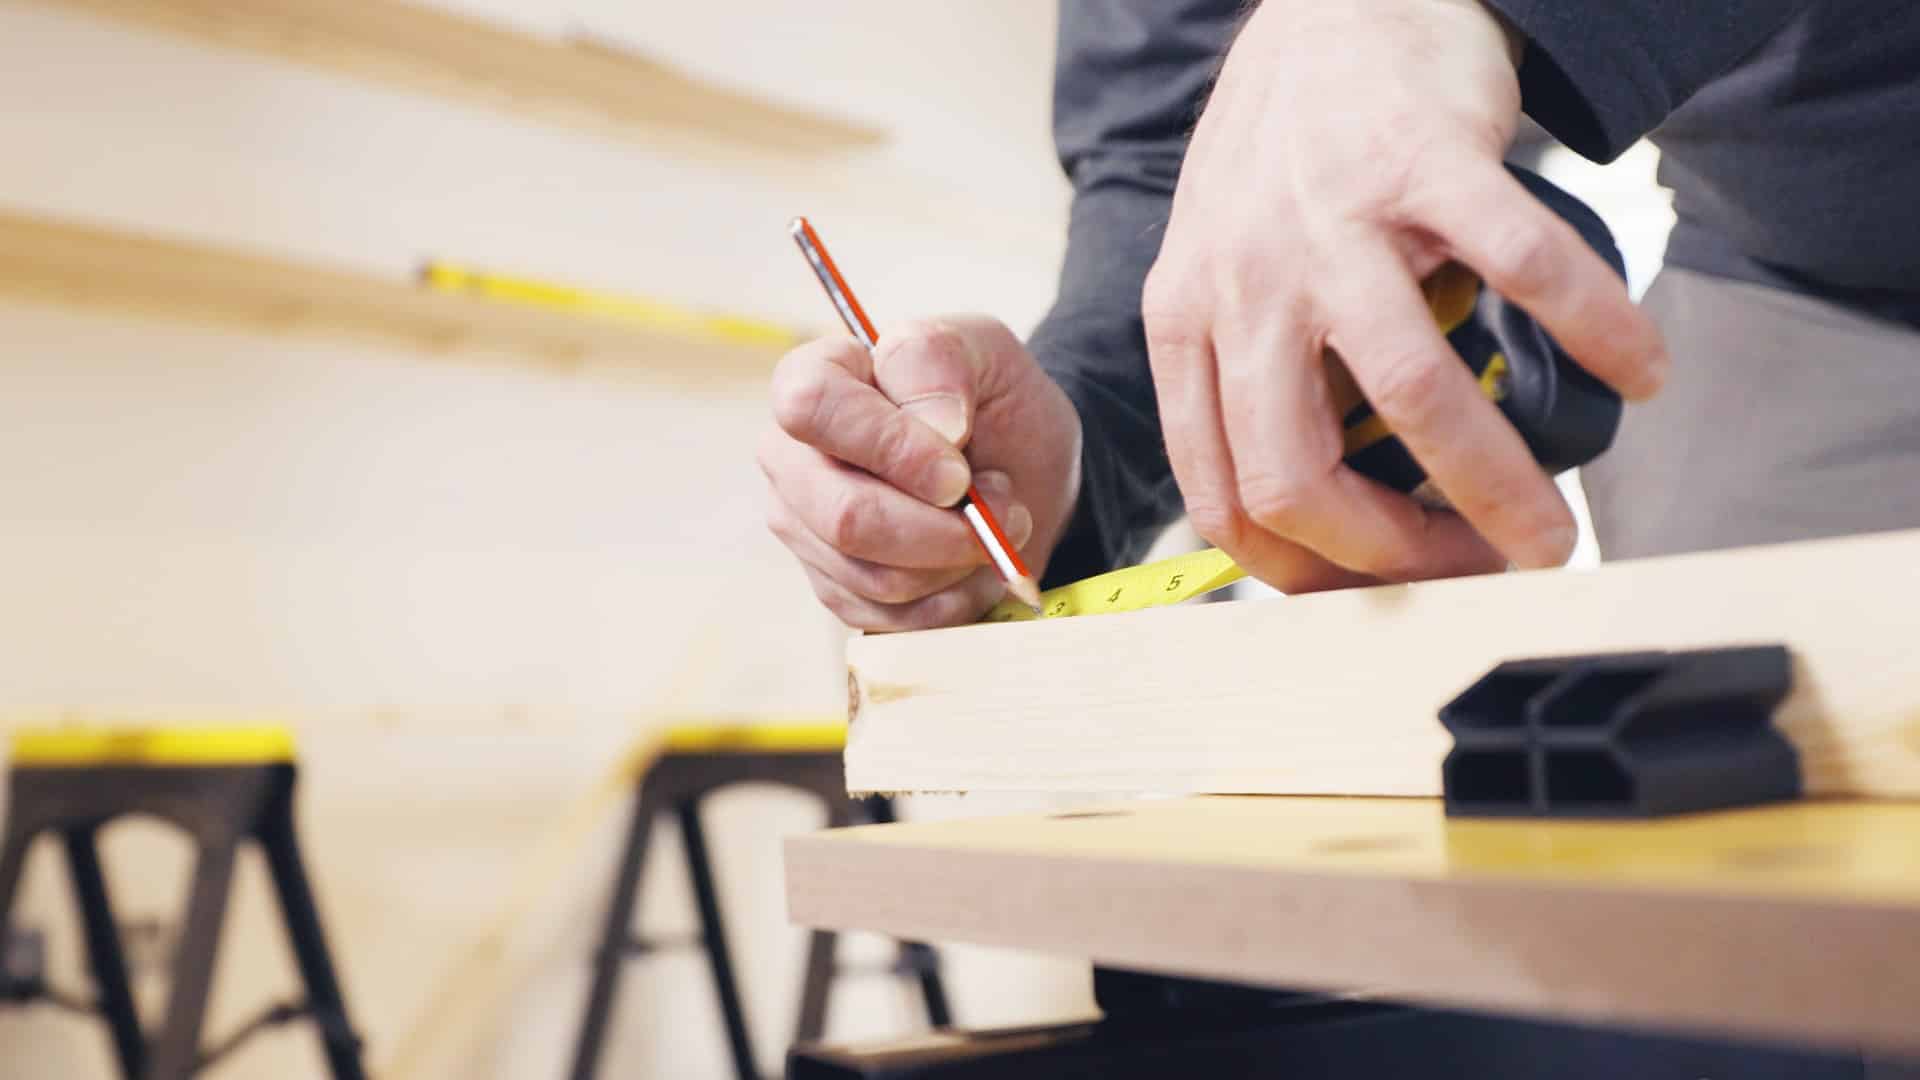 man marking wood with pencil